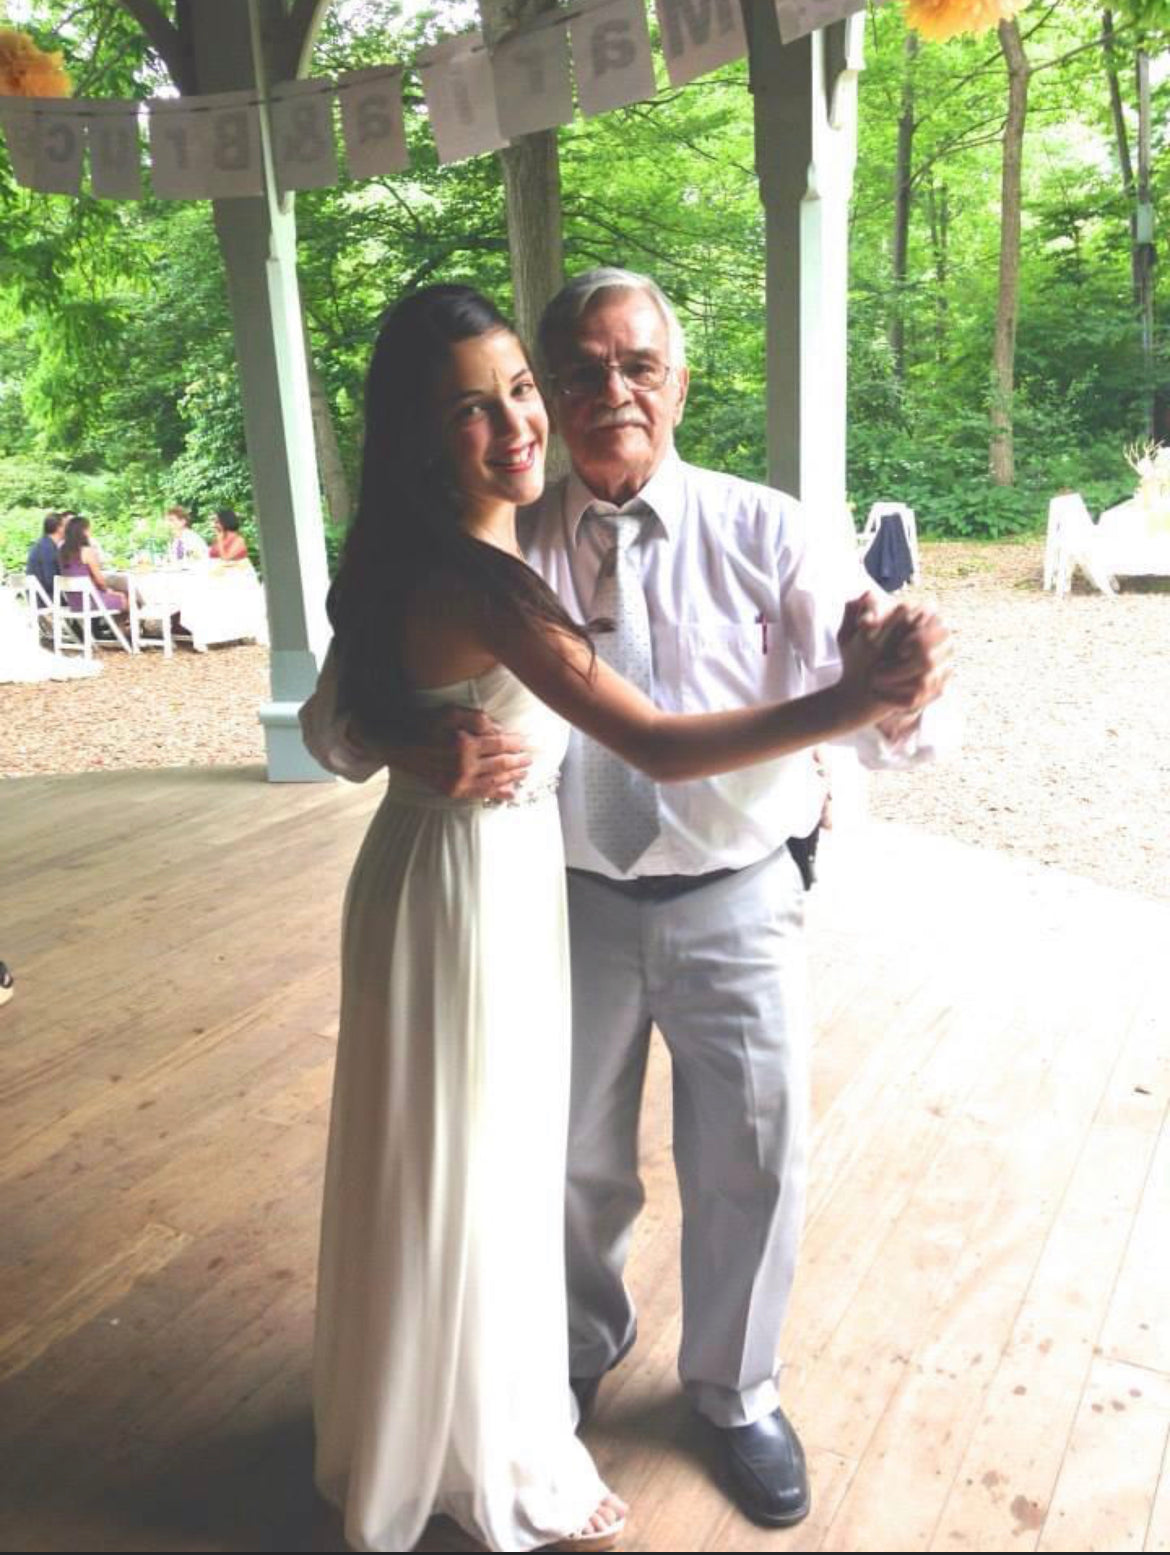 Paige and her Grandfather, Popou, slow dancing at her aunt's wedding. Photo credit to Lauren DeAngelo.